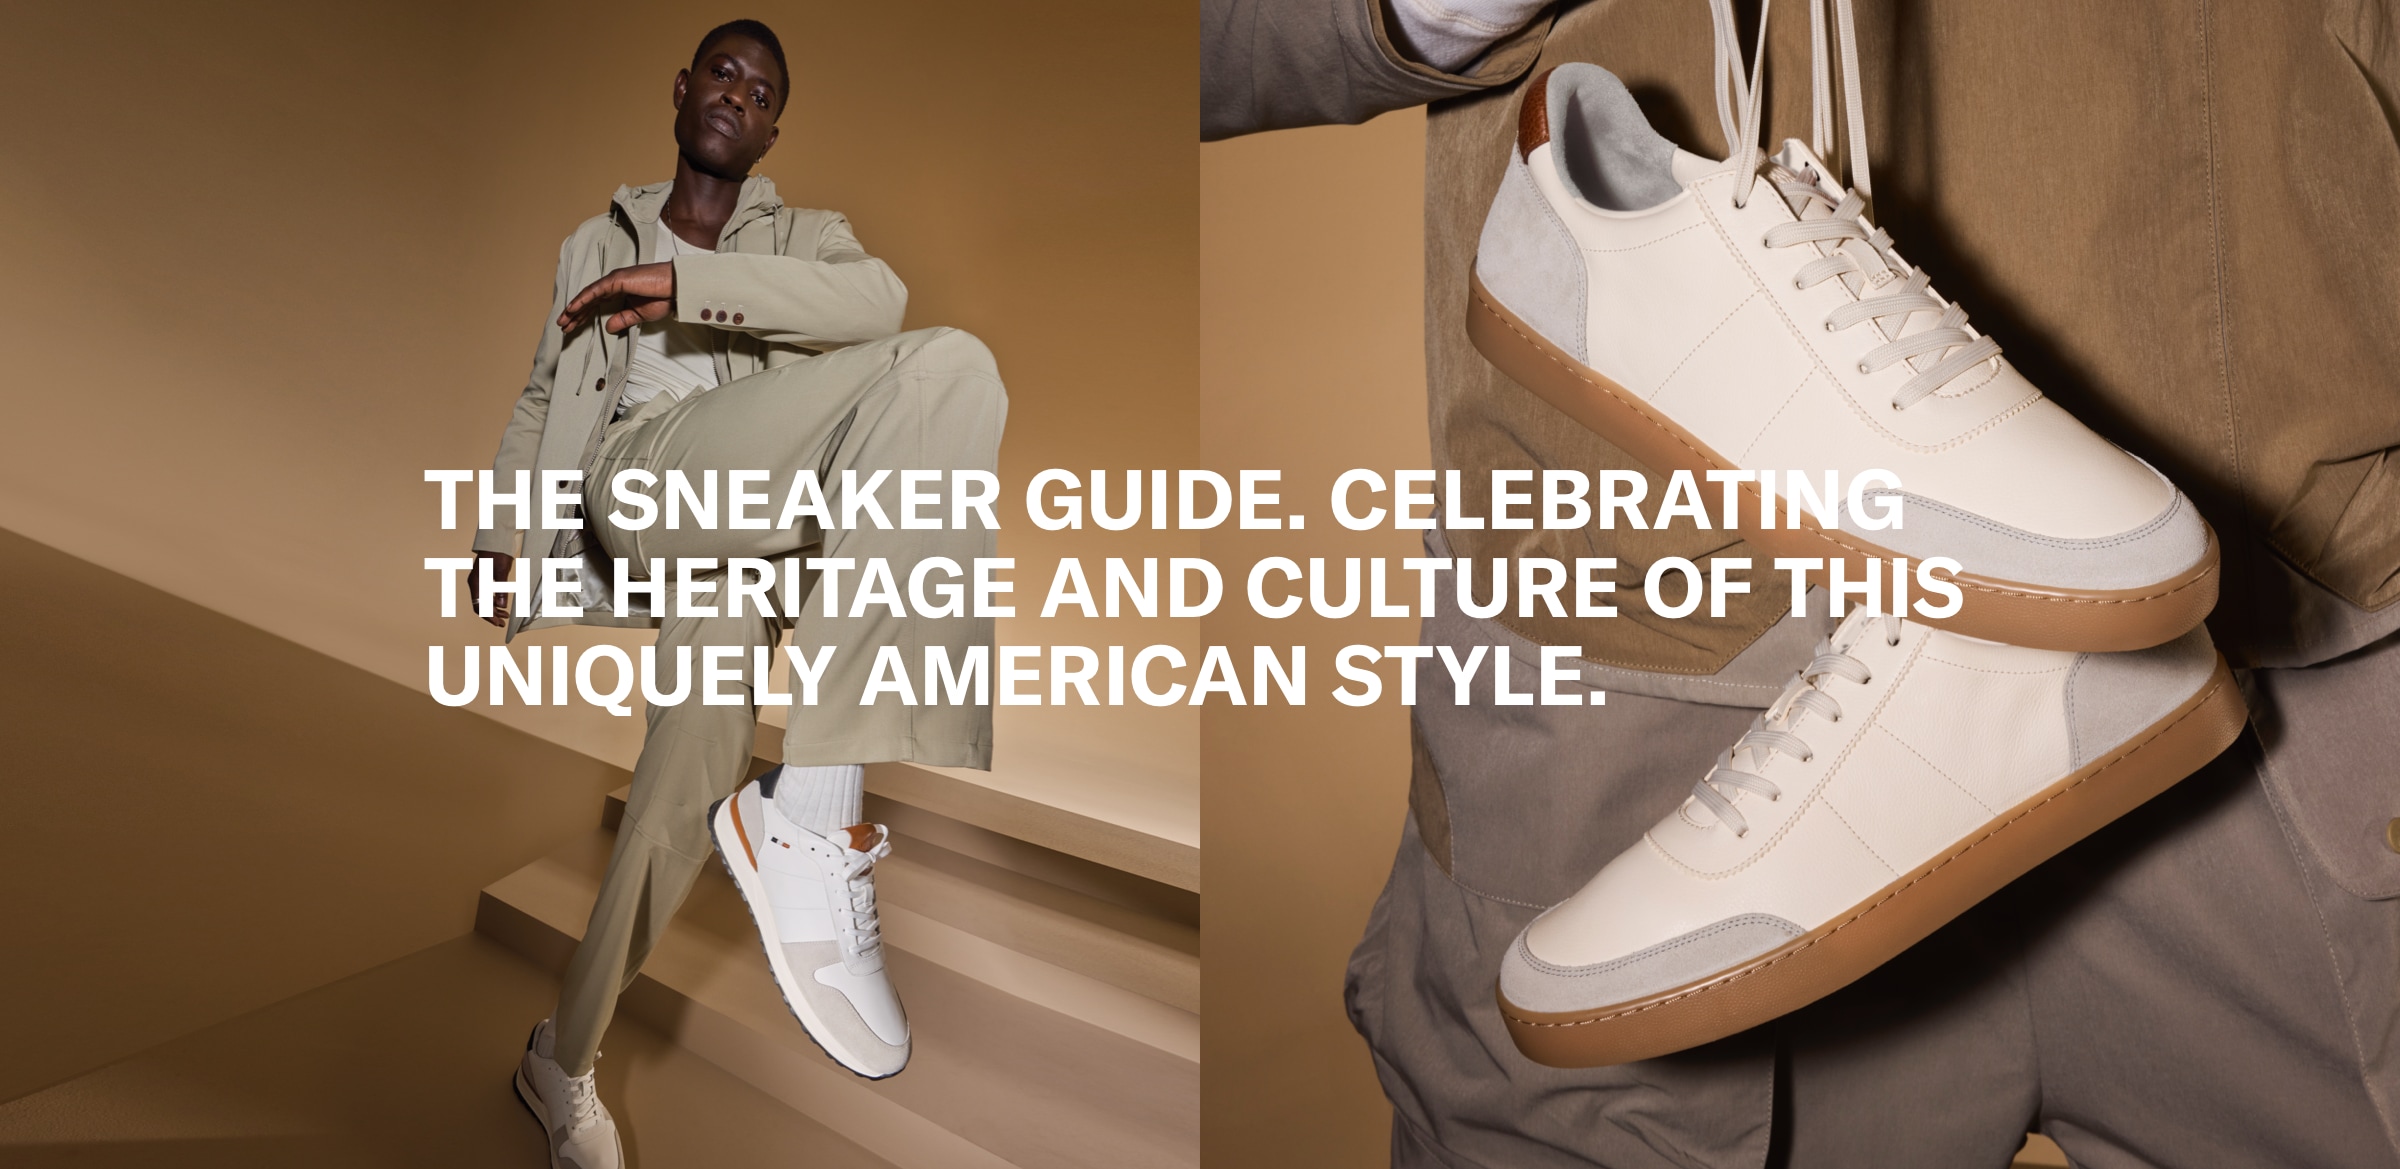 The Sneaker Guide Celebrating the Heritage and Culture of this Uniquely American Style